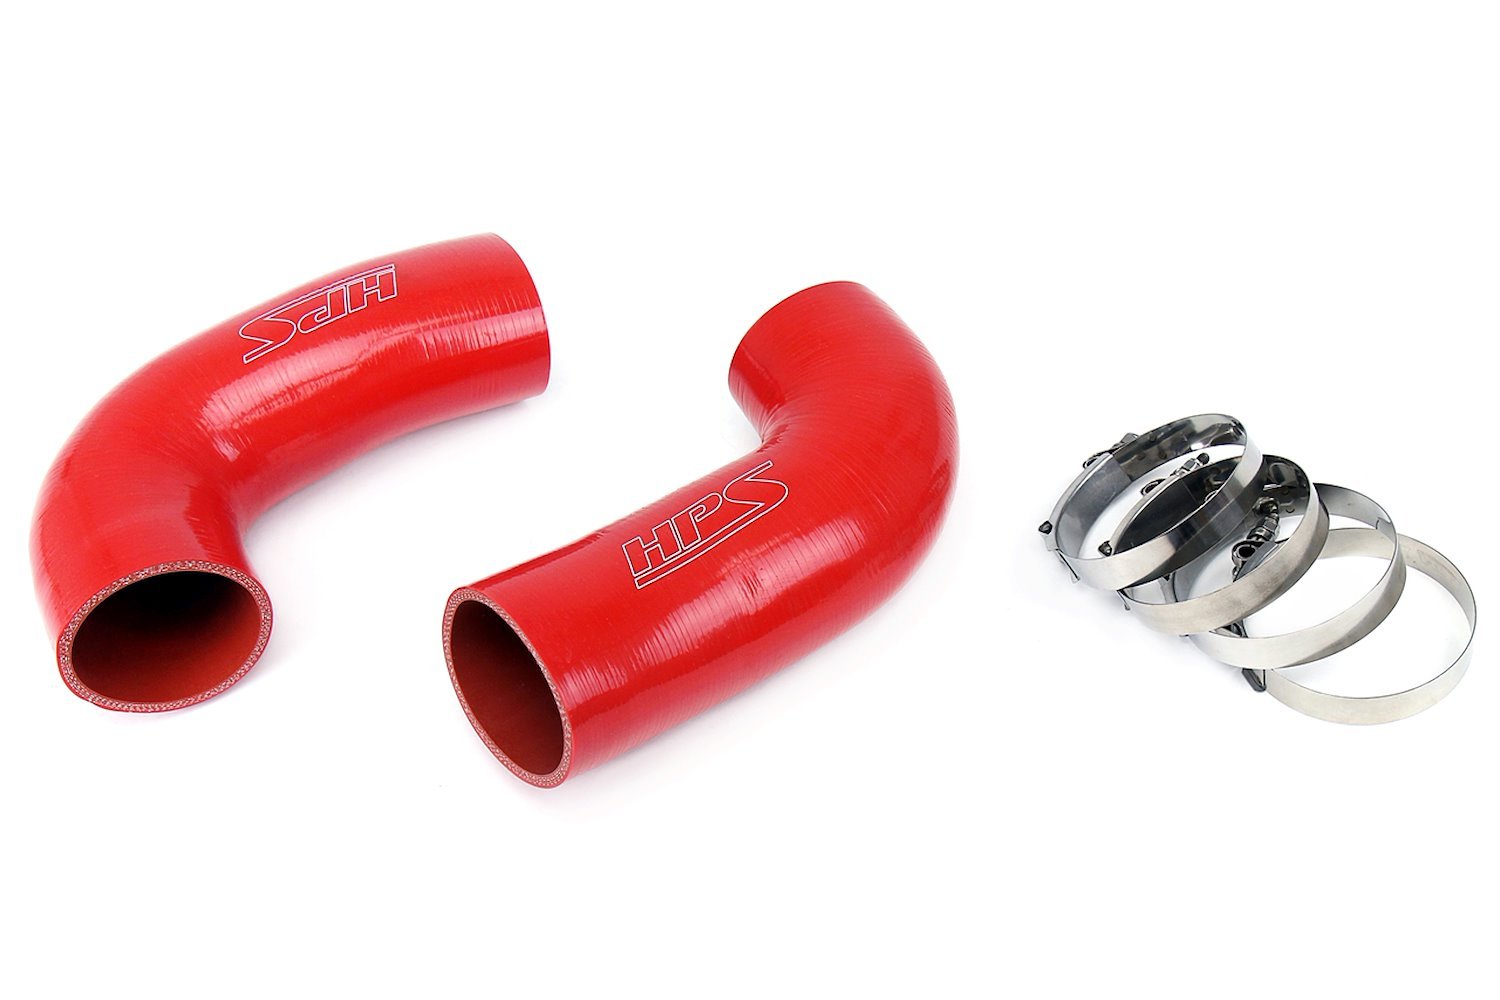 57-1291-RED Silicone Air Intake, Replace Stock Restrictive Air Intake, Improve Throttle Response, No Heat Soak